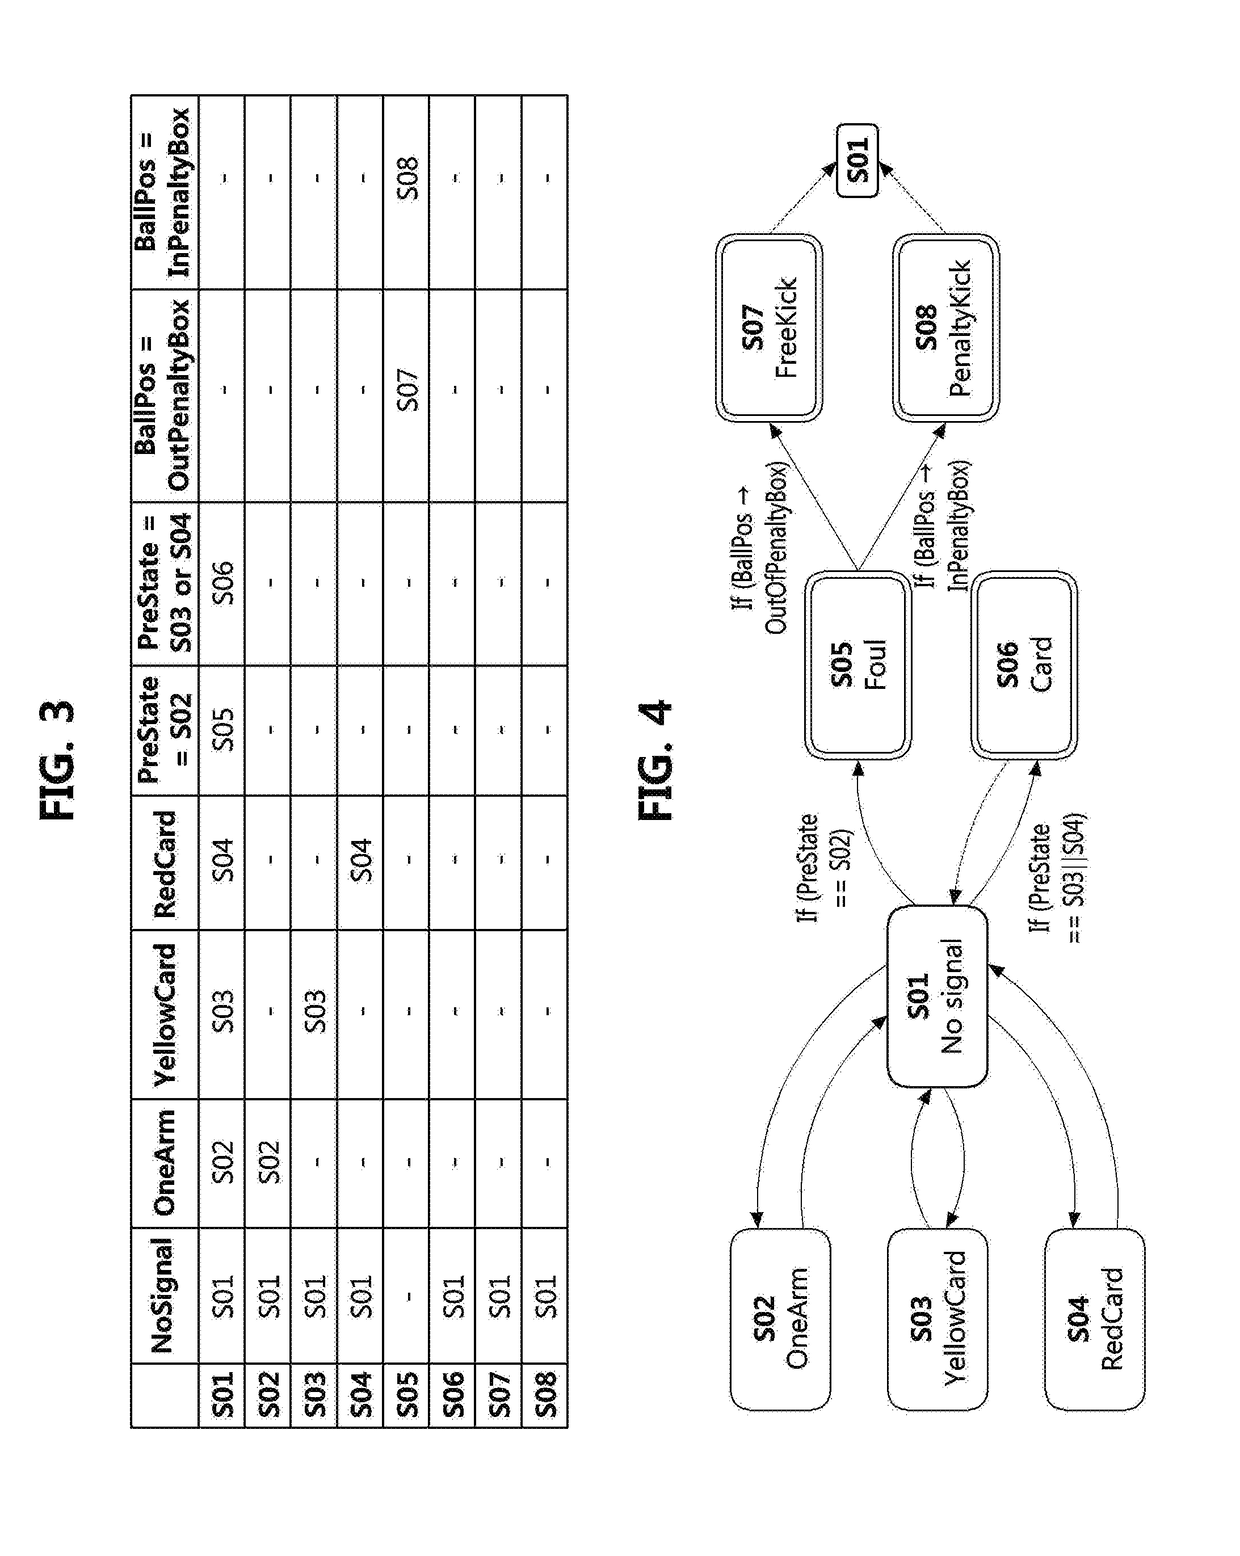 Apparatus and method for detecting event based on deterministic finite automata in soccer video